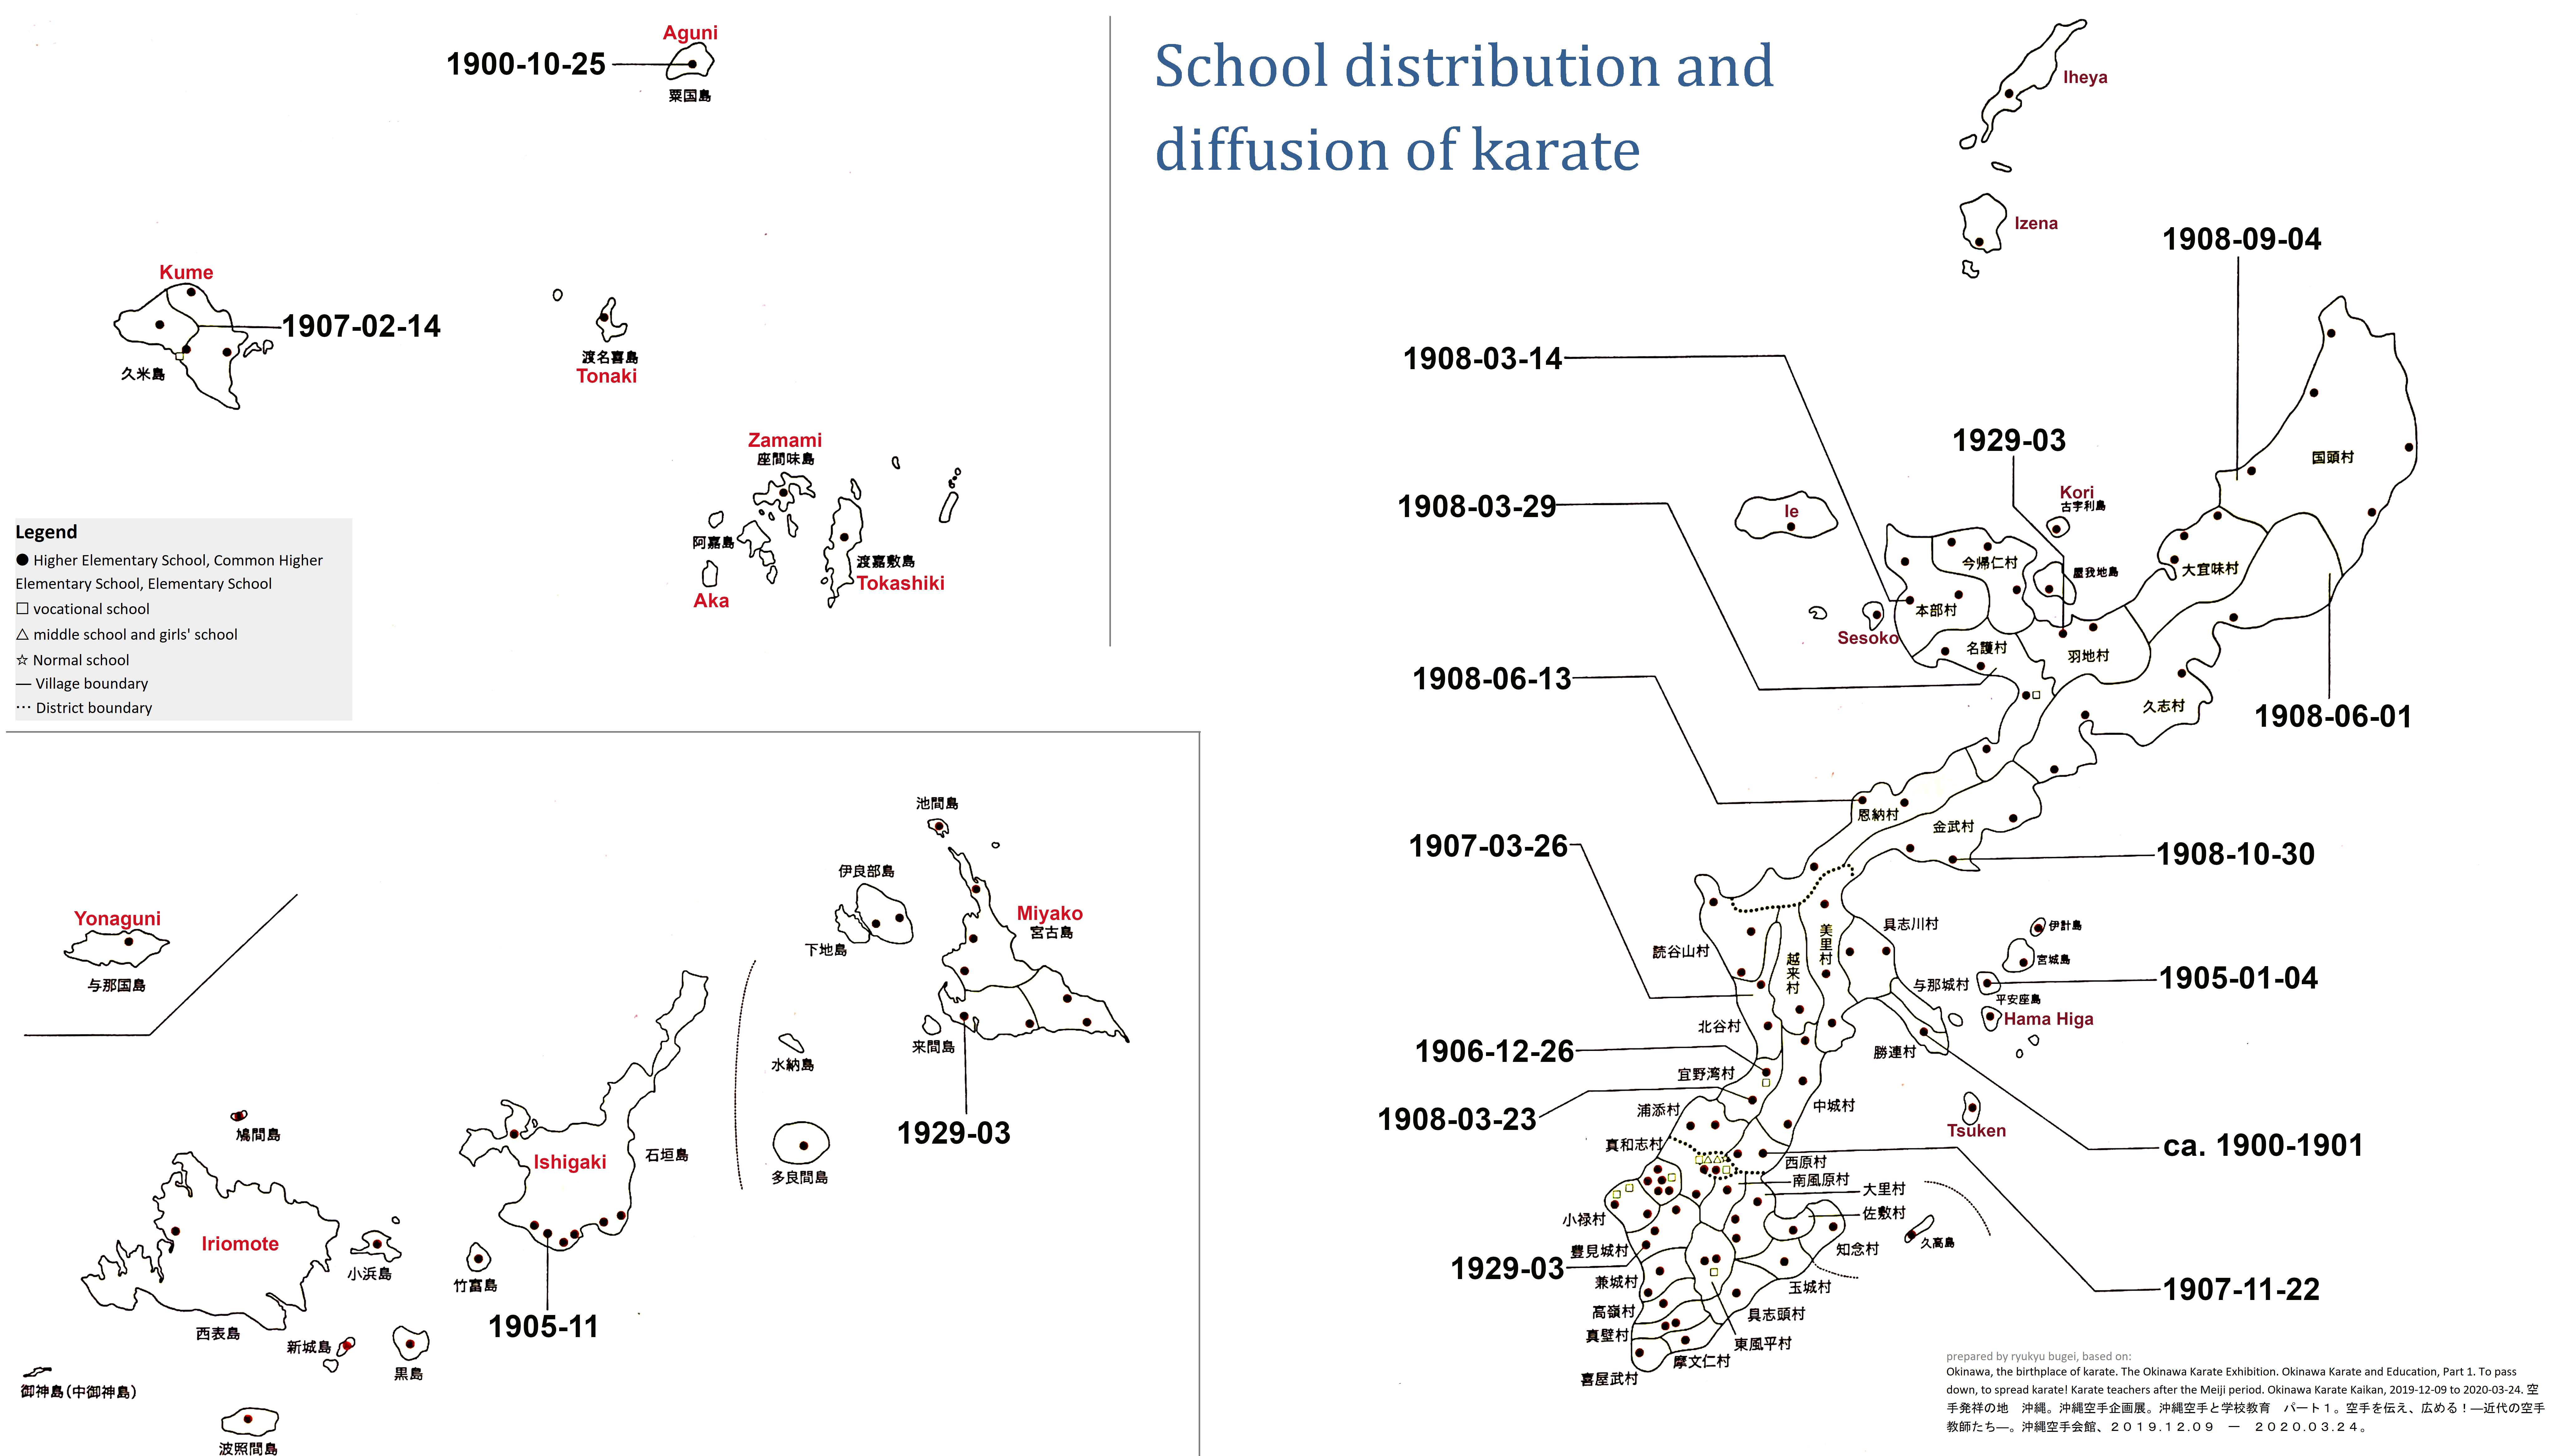 Map of school distribution and karate diffusion